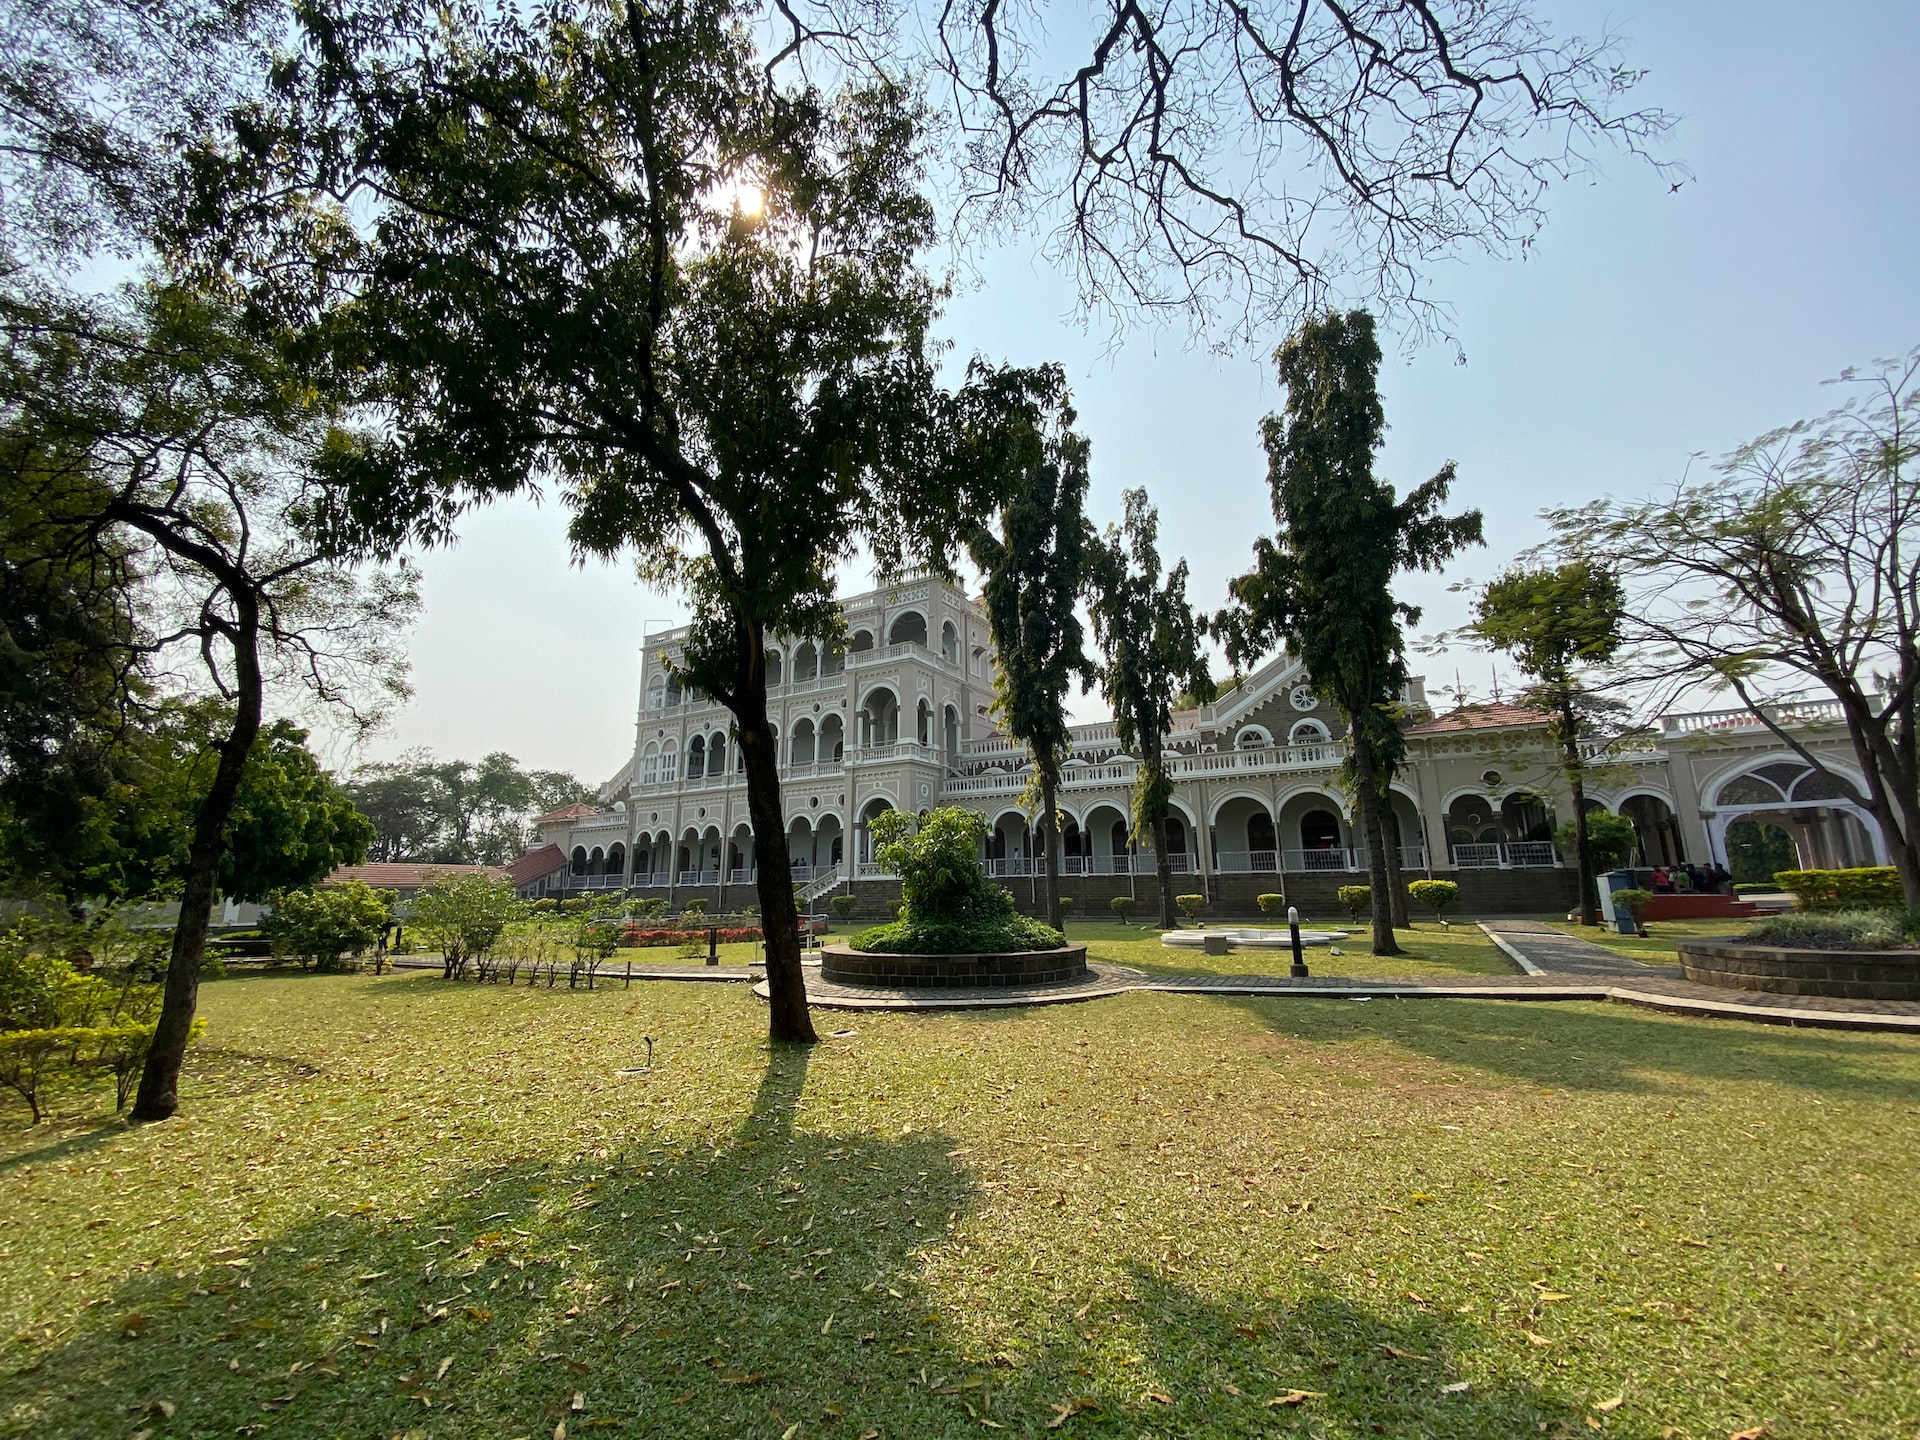 Experience the History and Culture of Pune at the Aga Khan Palace